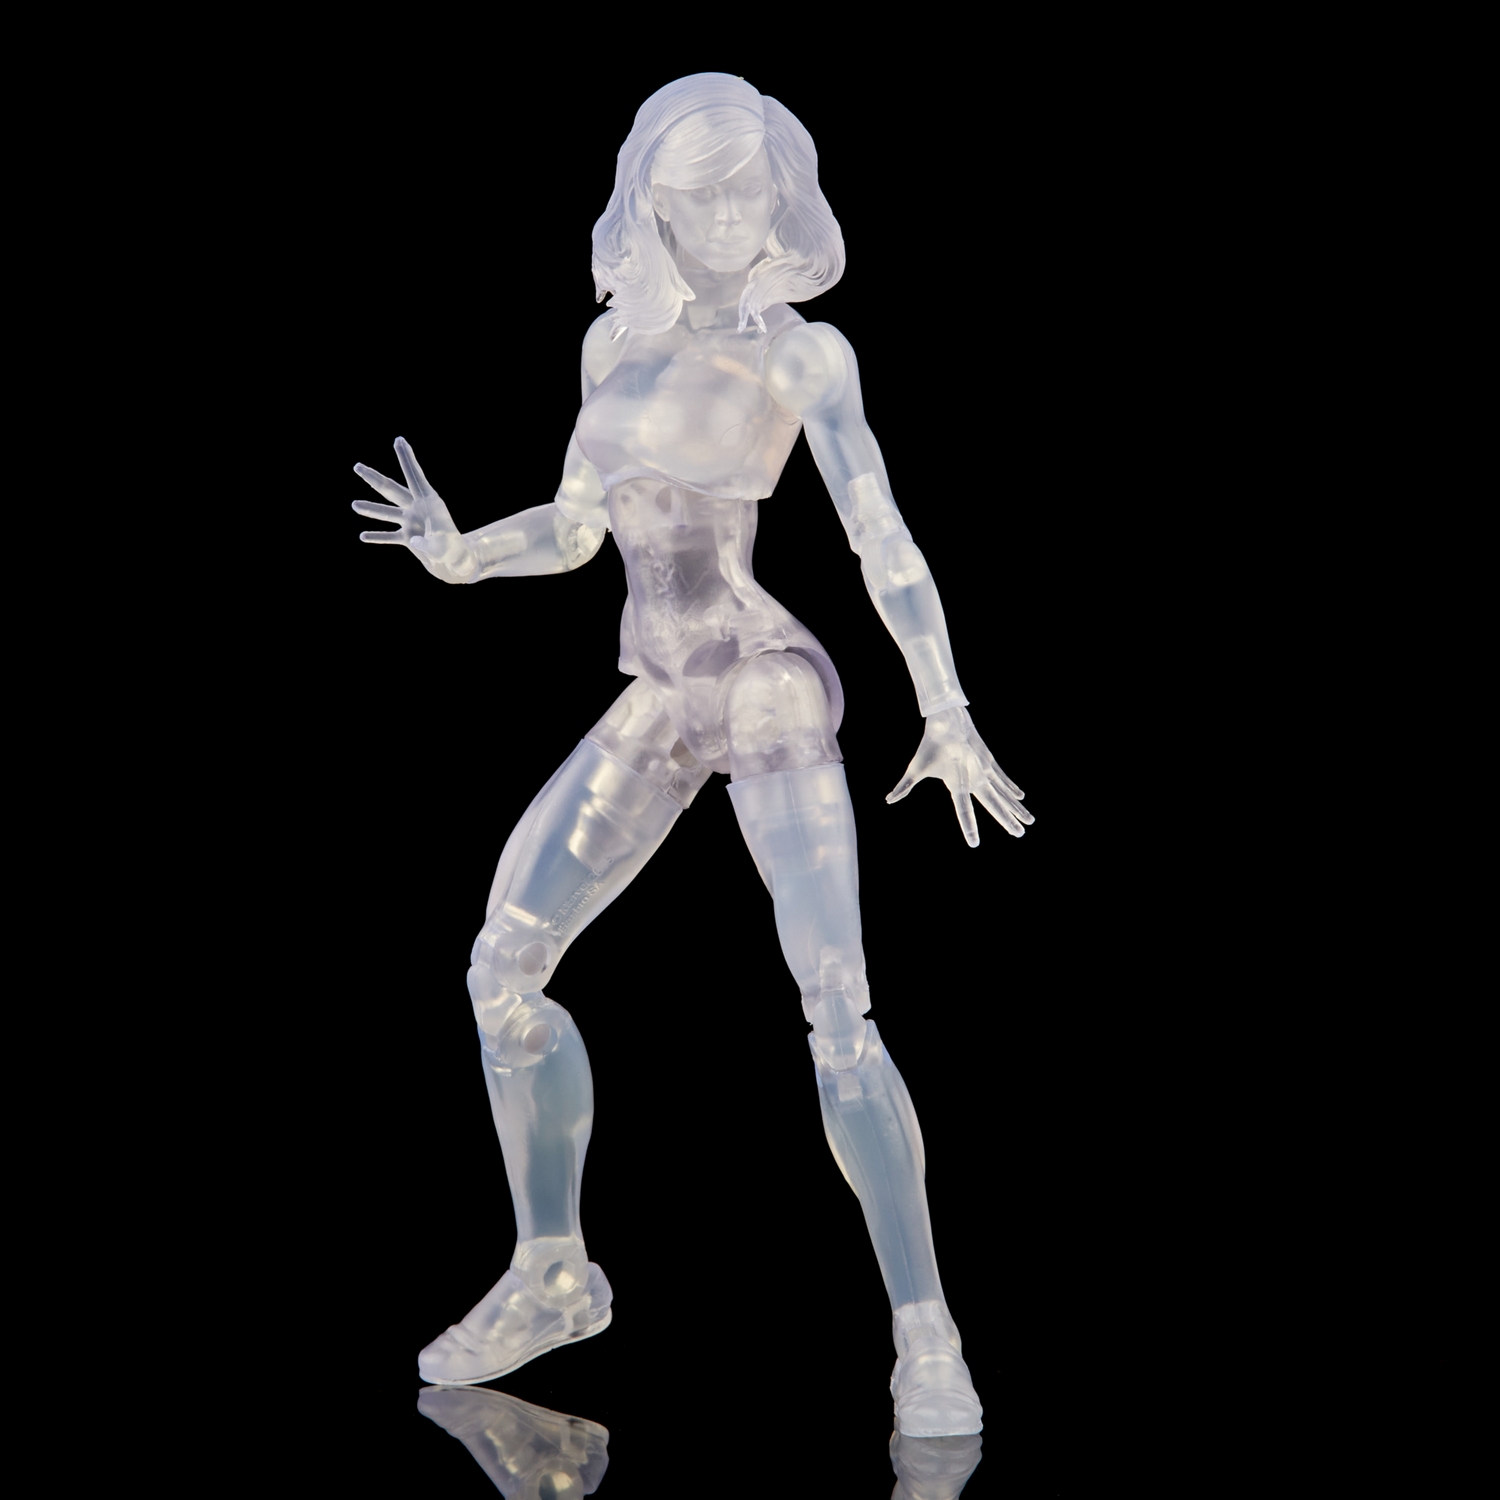 MARVEL LEGENDS SERIES 6-INCH RETRO FANTASTIC FOUR MARVEL’S INVISIBLE WOMAN Figure (Clear)_oop 9.jpg